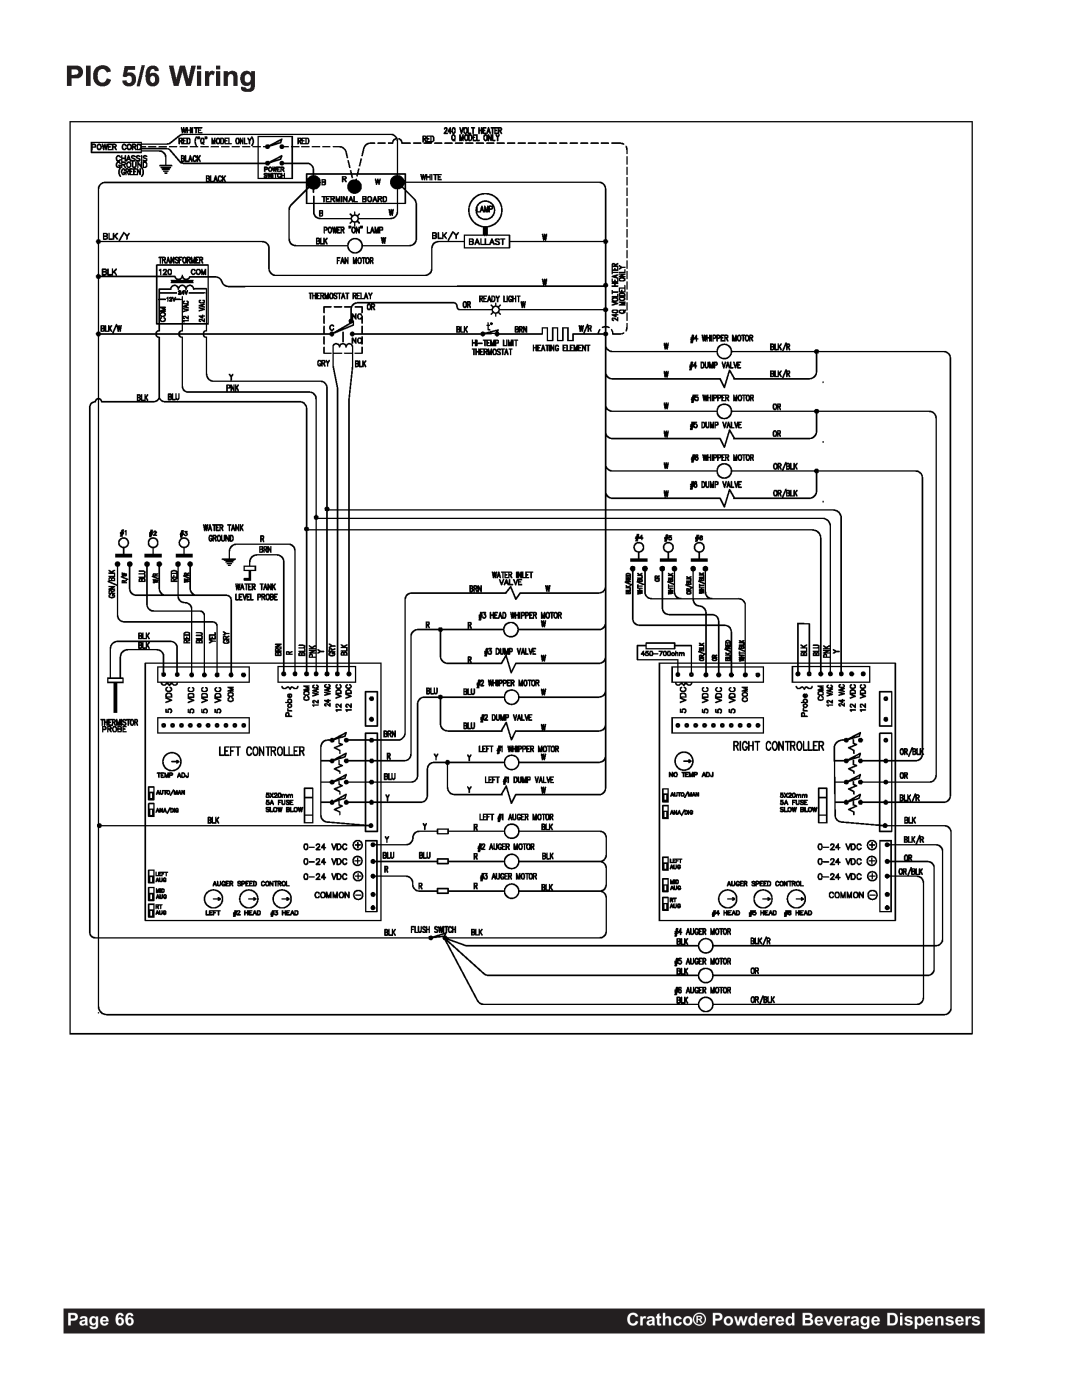 Grindmaster CC-302-20 service manual PIC 5/6 Wiring, Page, Crathco Powdered Beverage Dispensers 